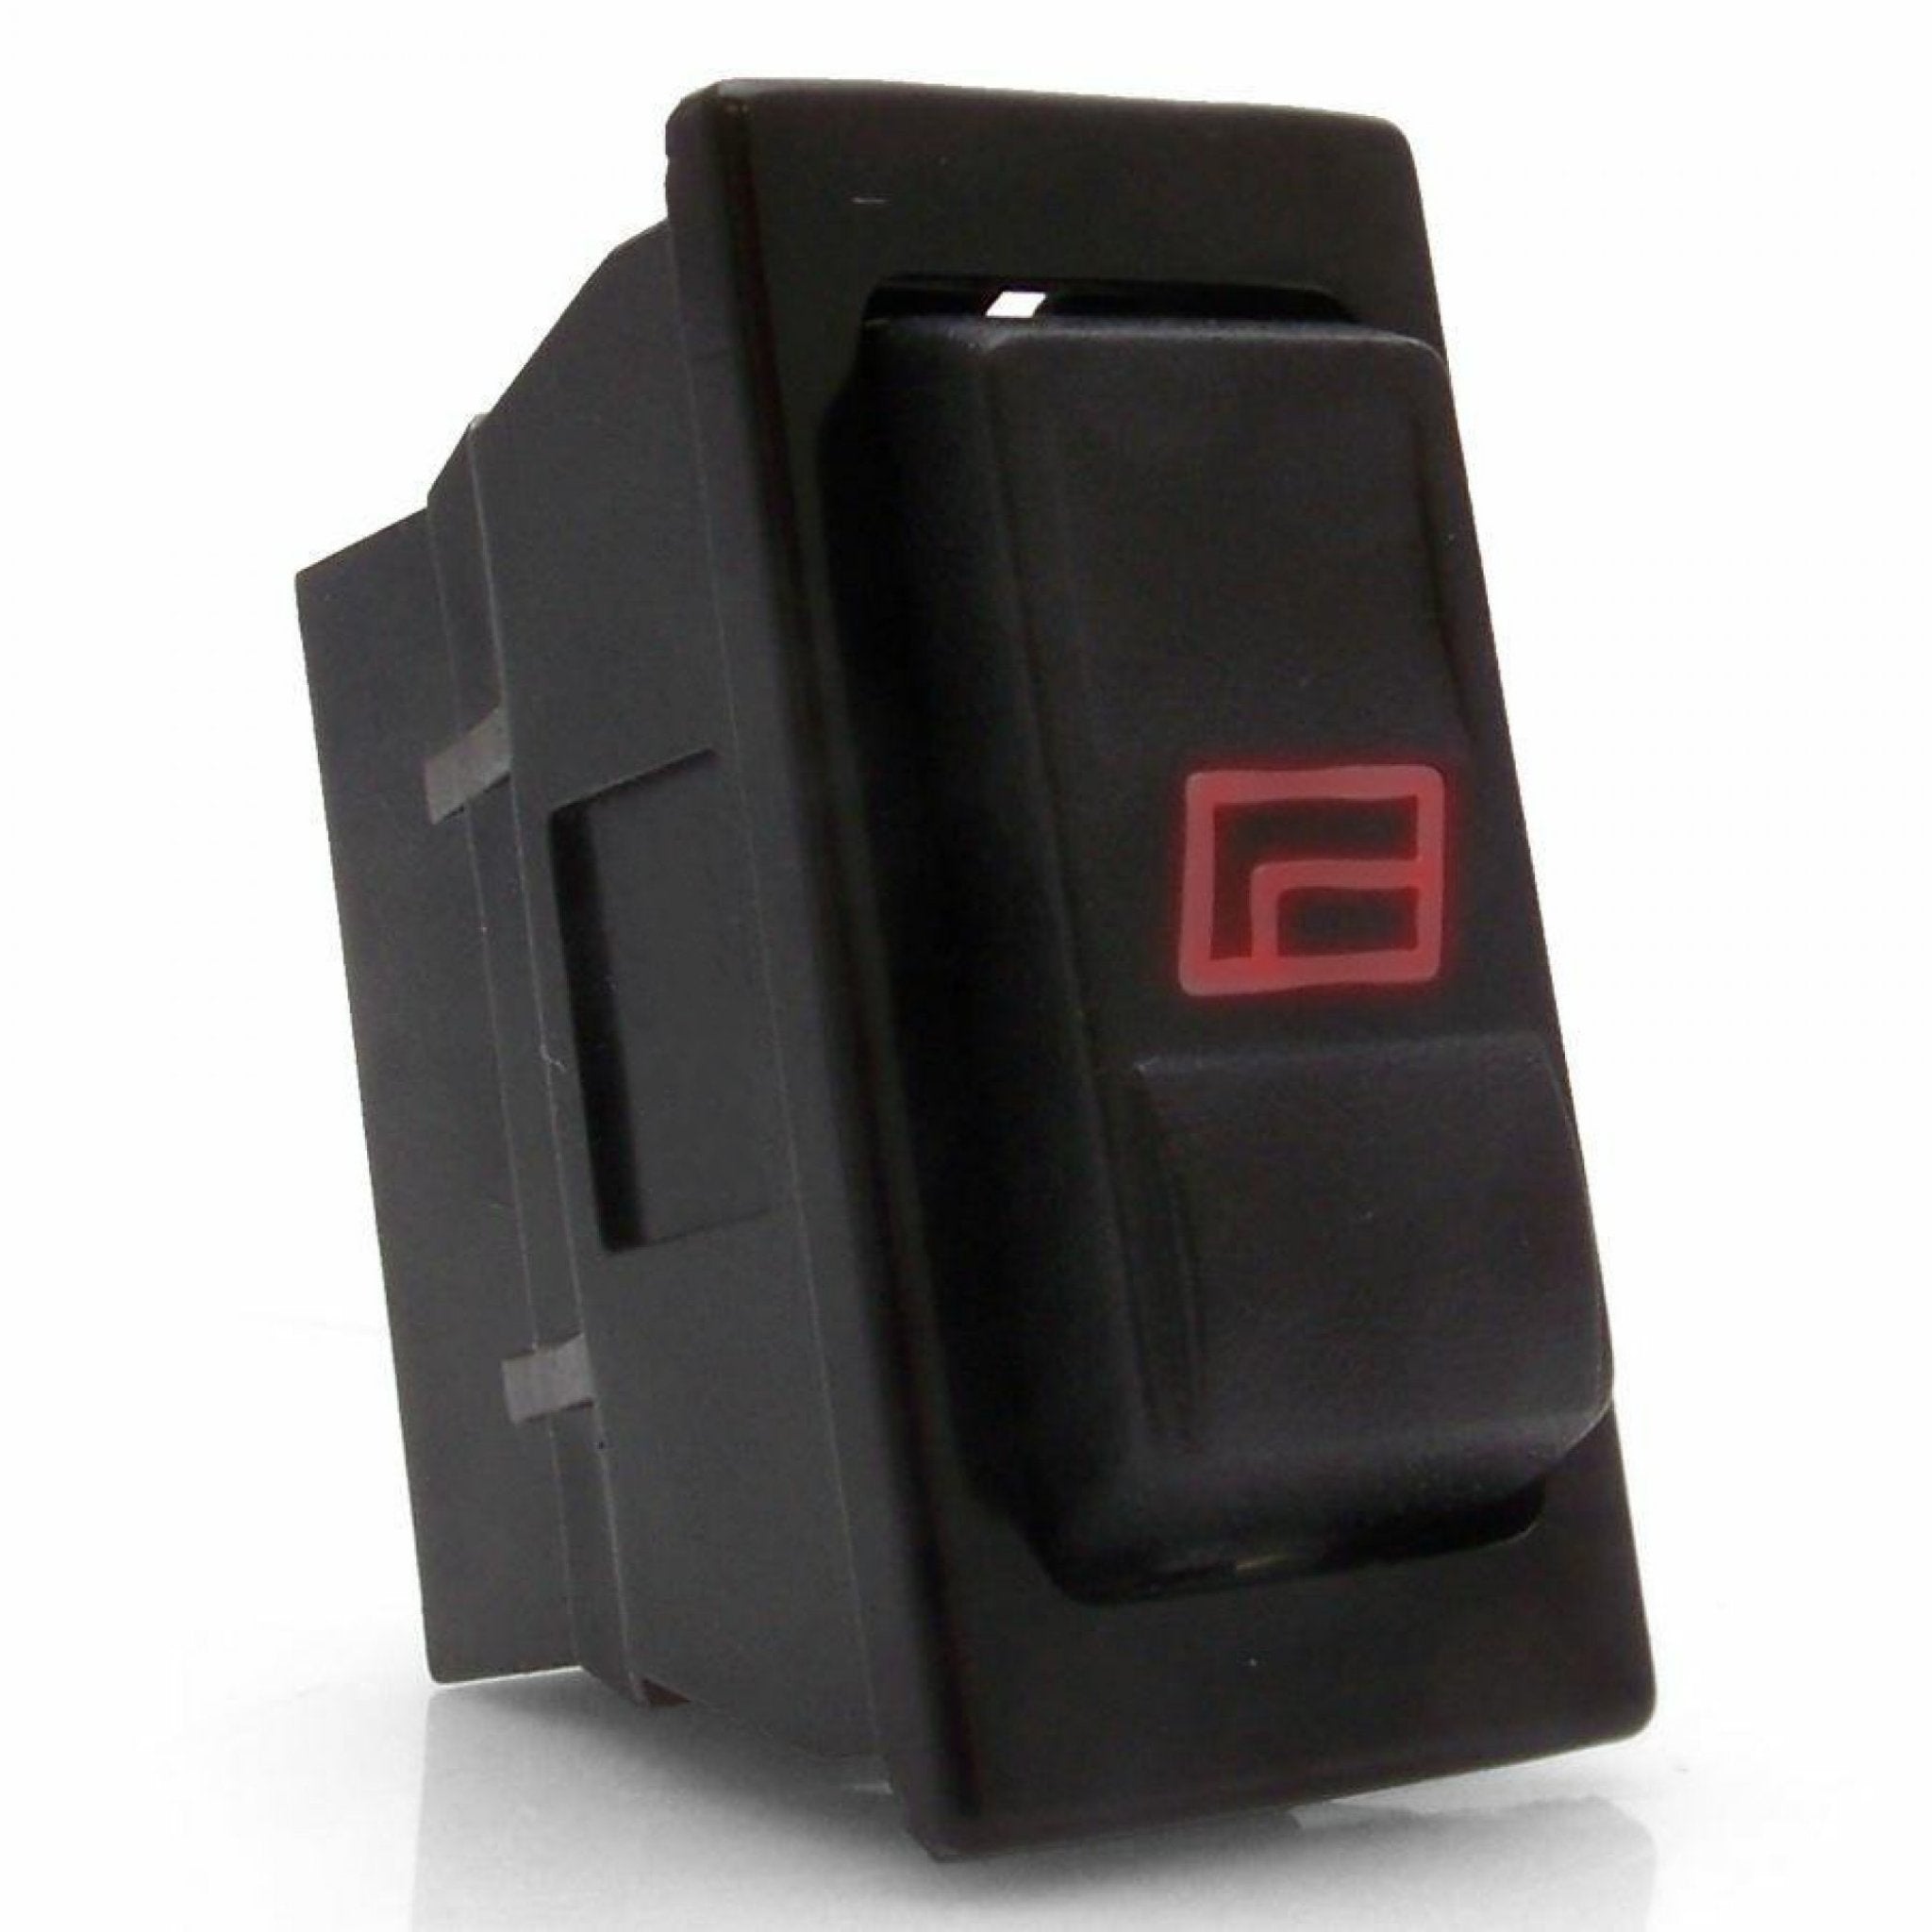 Power Window Up Down Momentary Rocker Switch Red Illuminated Icon 5 Pin 12V 20A